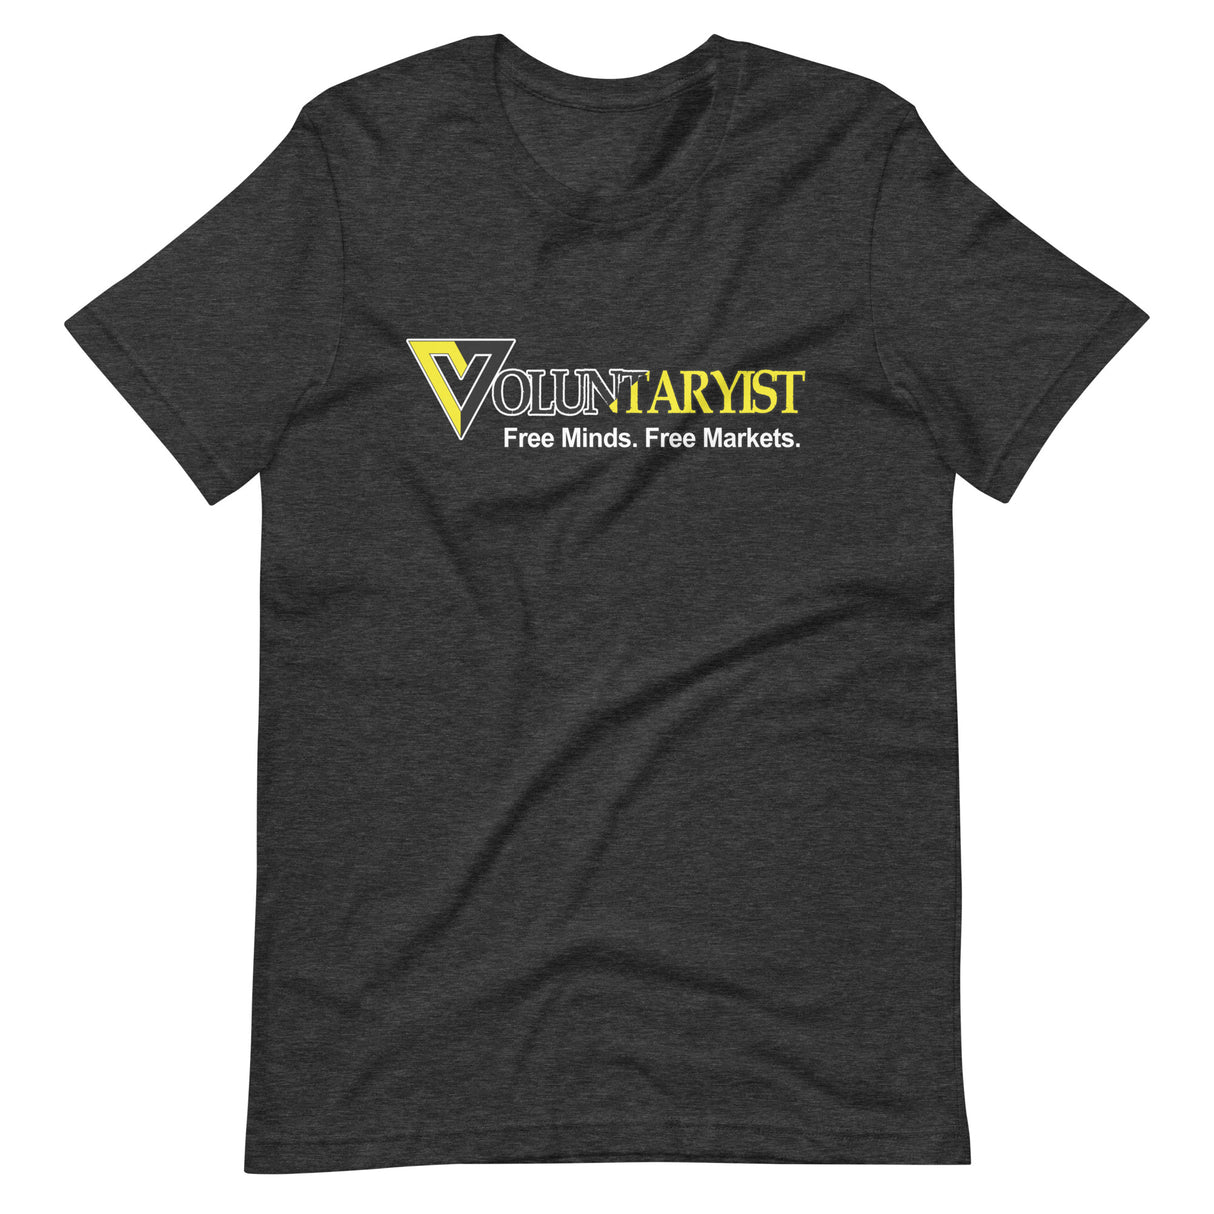 Voluntaryist Free Minds Free Markets Shirt by Libertarian Country